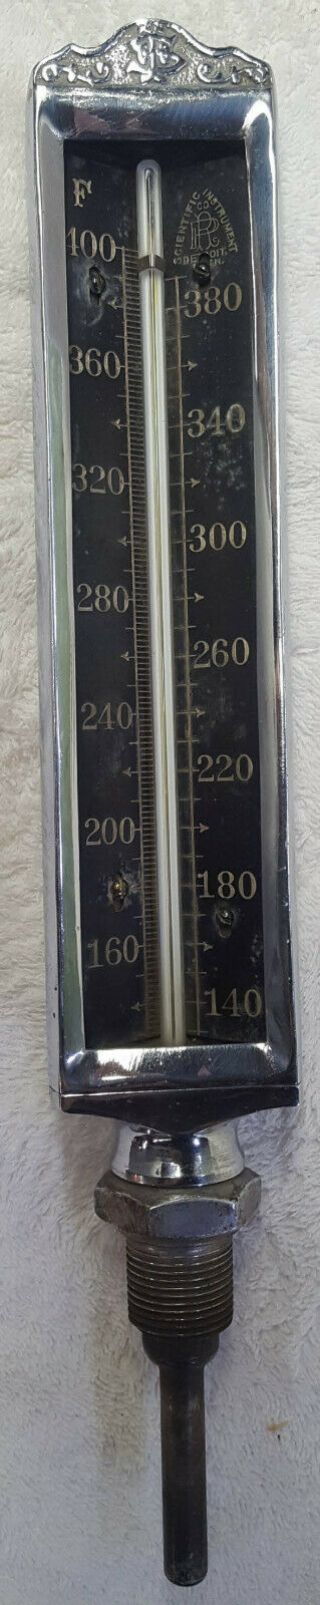 Scientific Instrrument Comany Boiler Steam Thermometer Chrome Gauge1920 